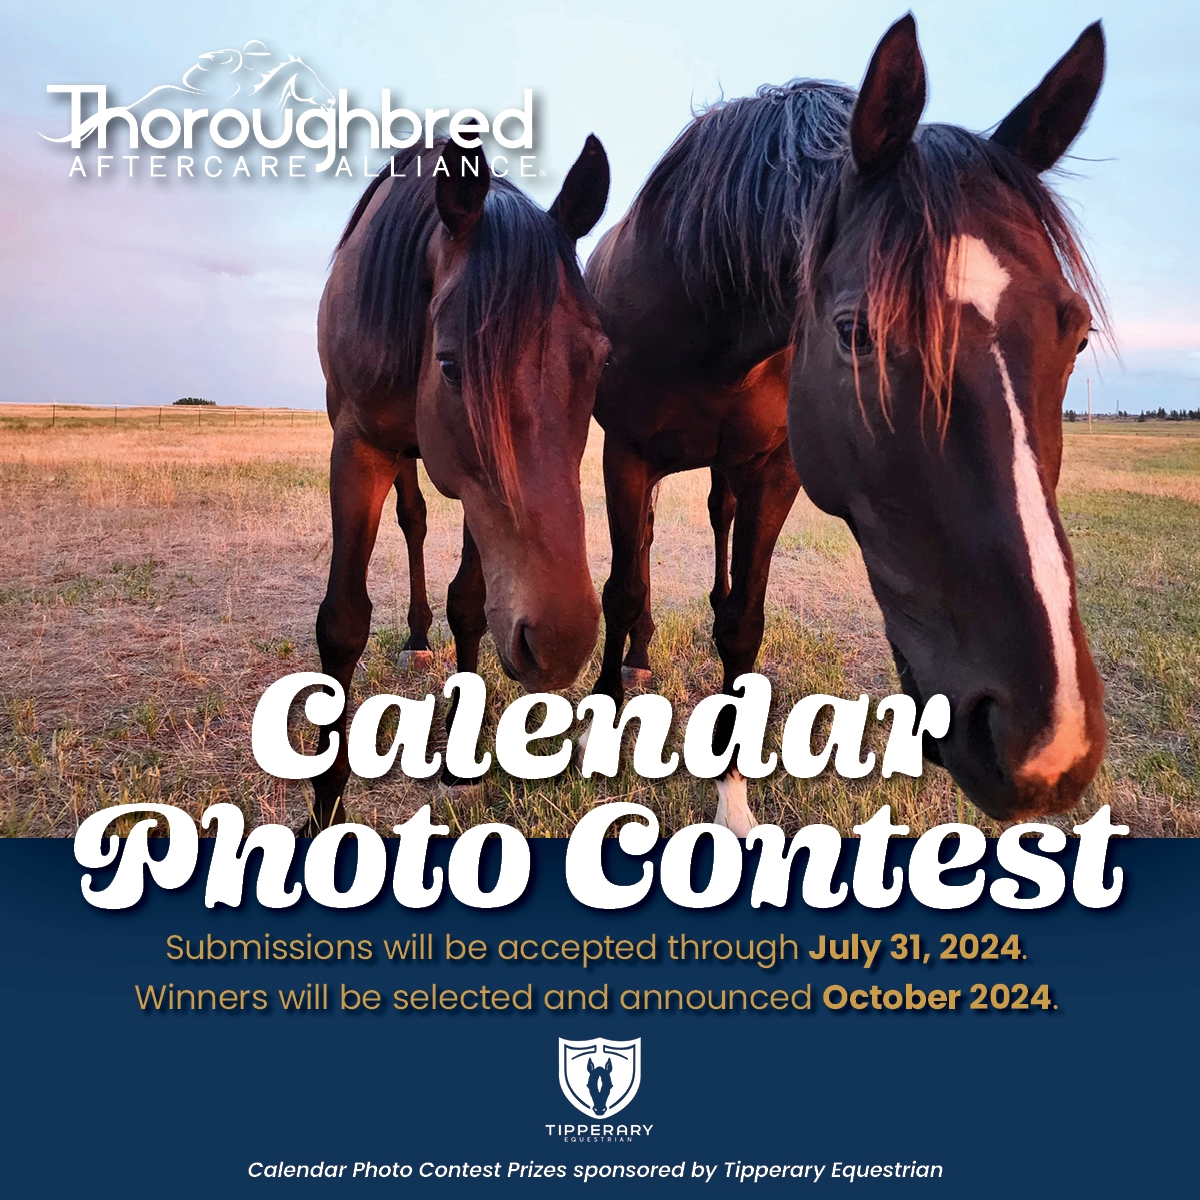 Thoroughbred Aftercare Alliance Announces Fourth Annual Calendar Photo Contest